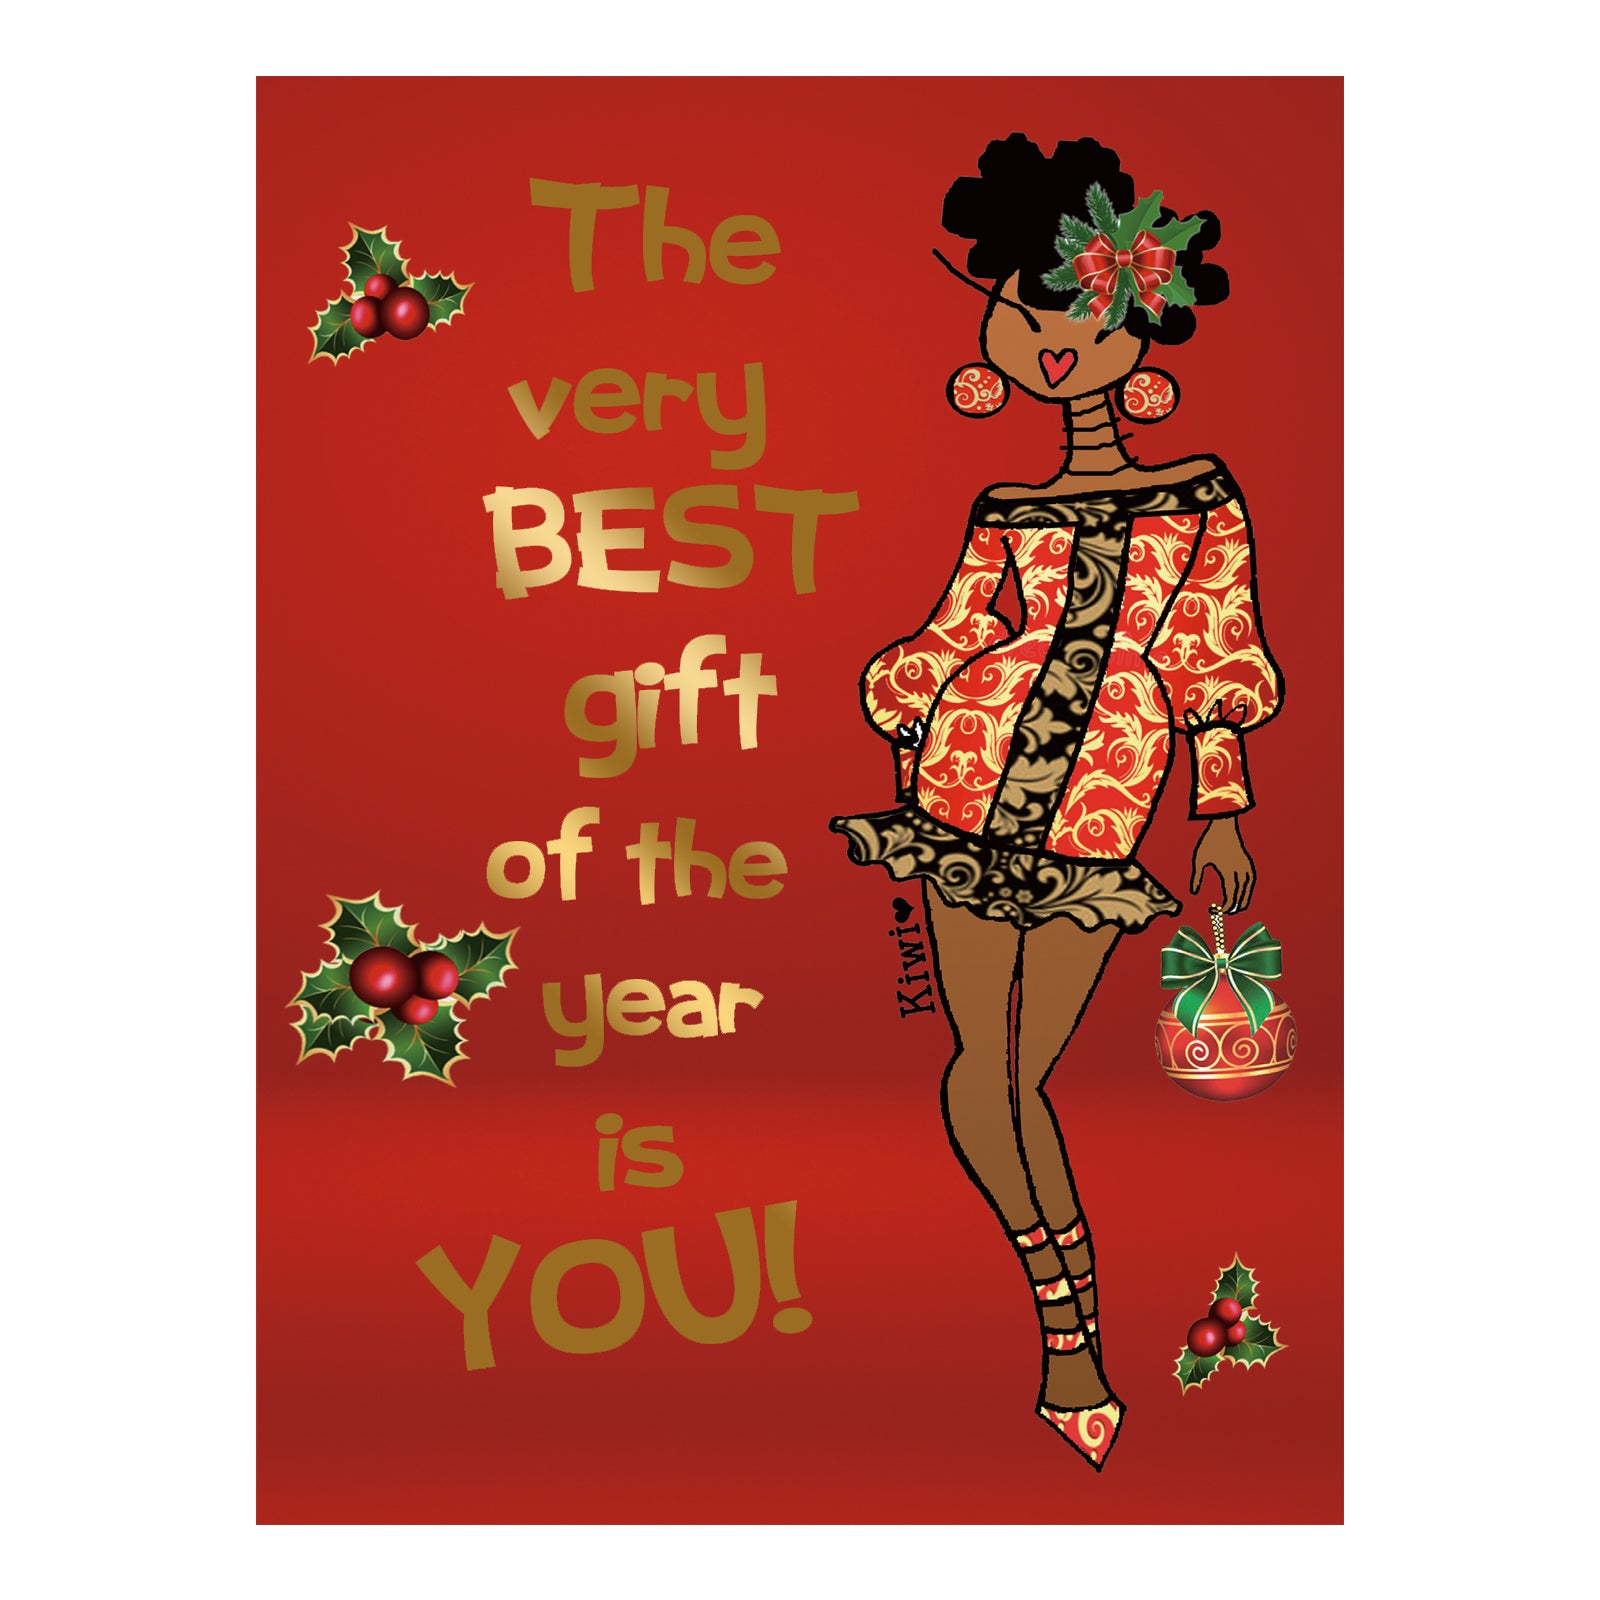 5 of 11: The Very Best Gift of the Year is You: African American Christmas Card Box Set